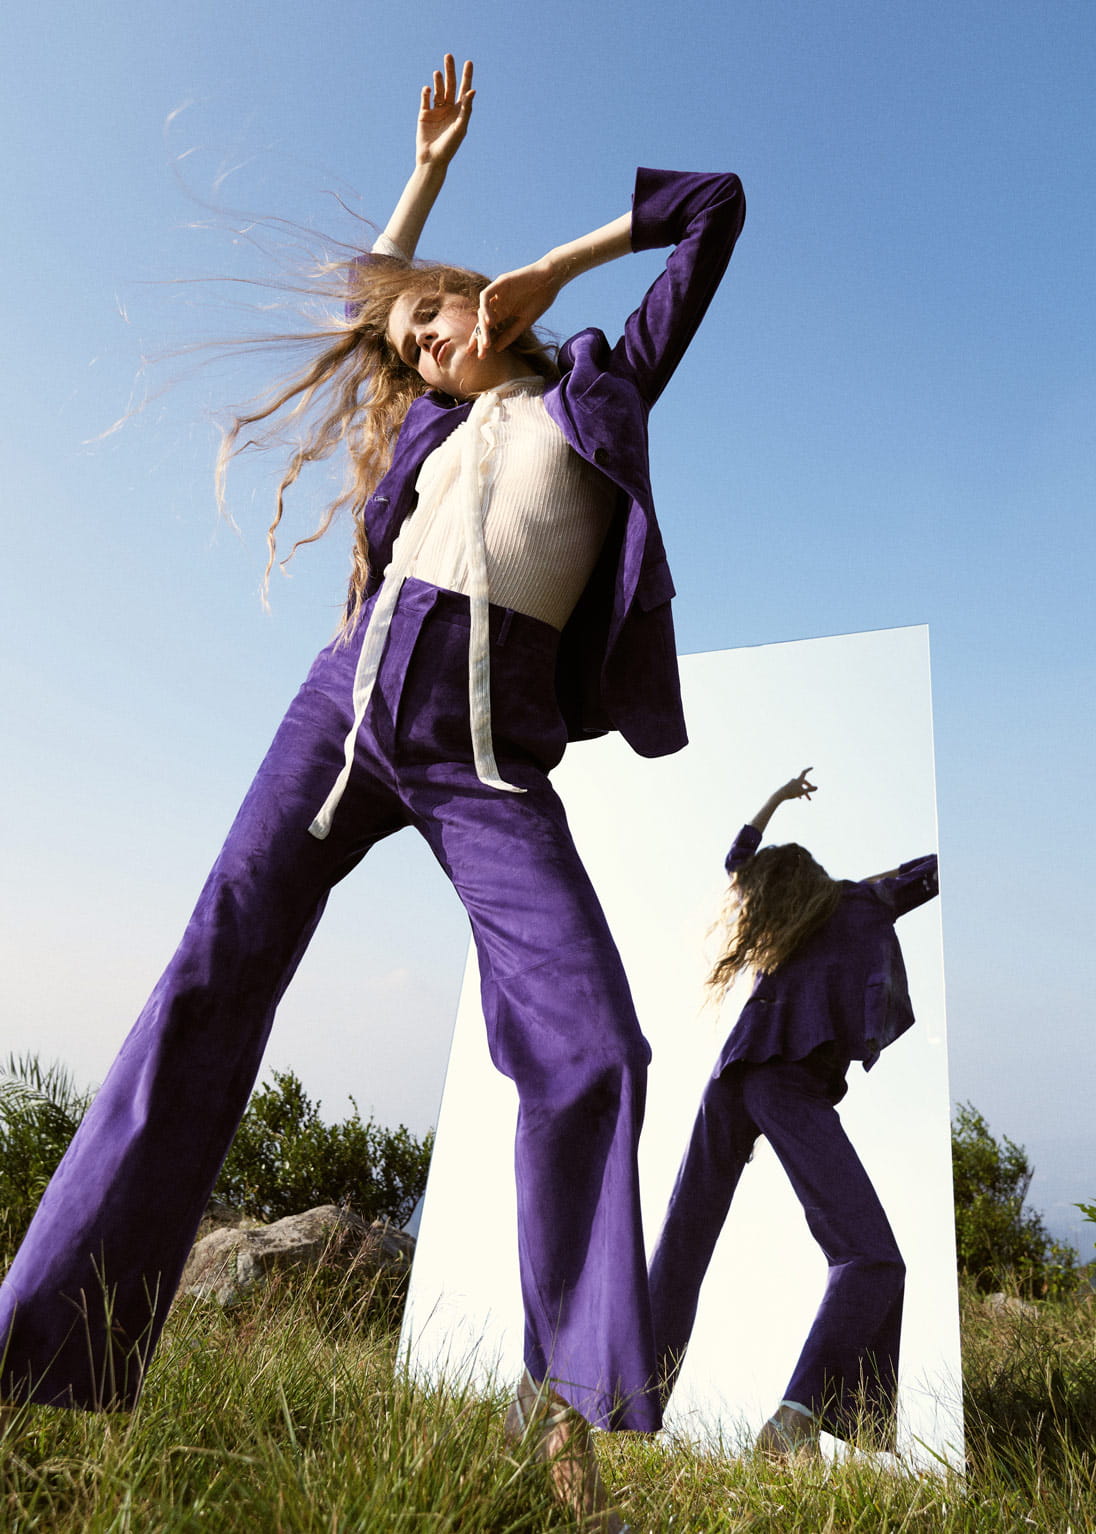 A model poses in front of a mirror on a grassy hill wearing a purple Salvatore Ferragamo suit